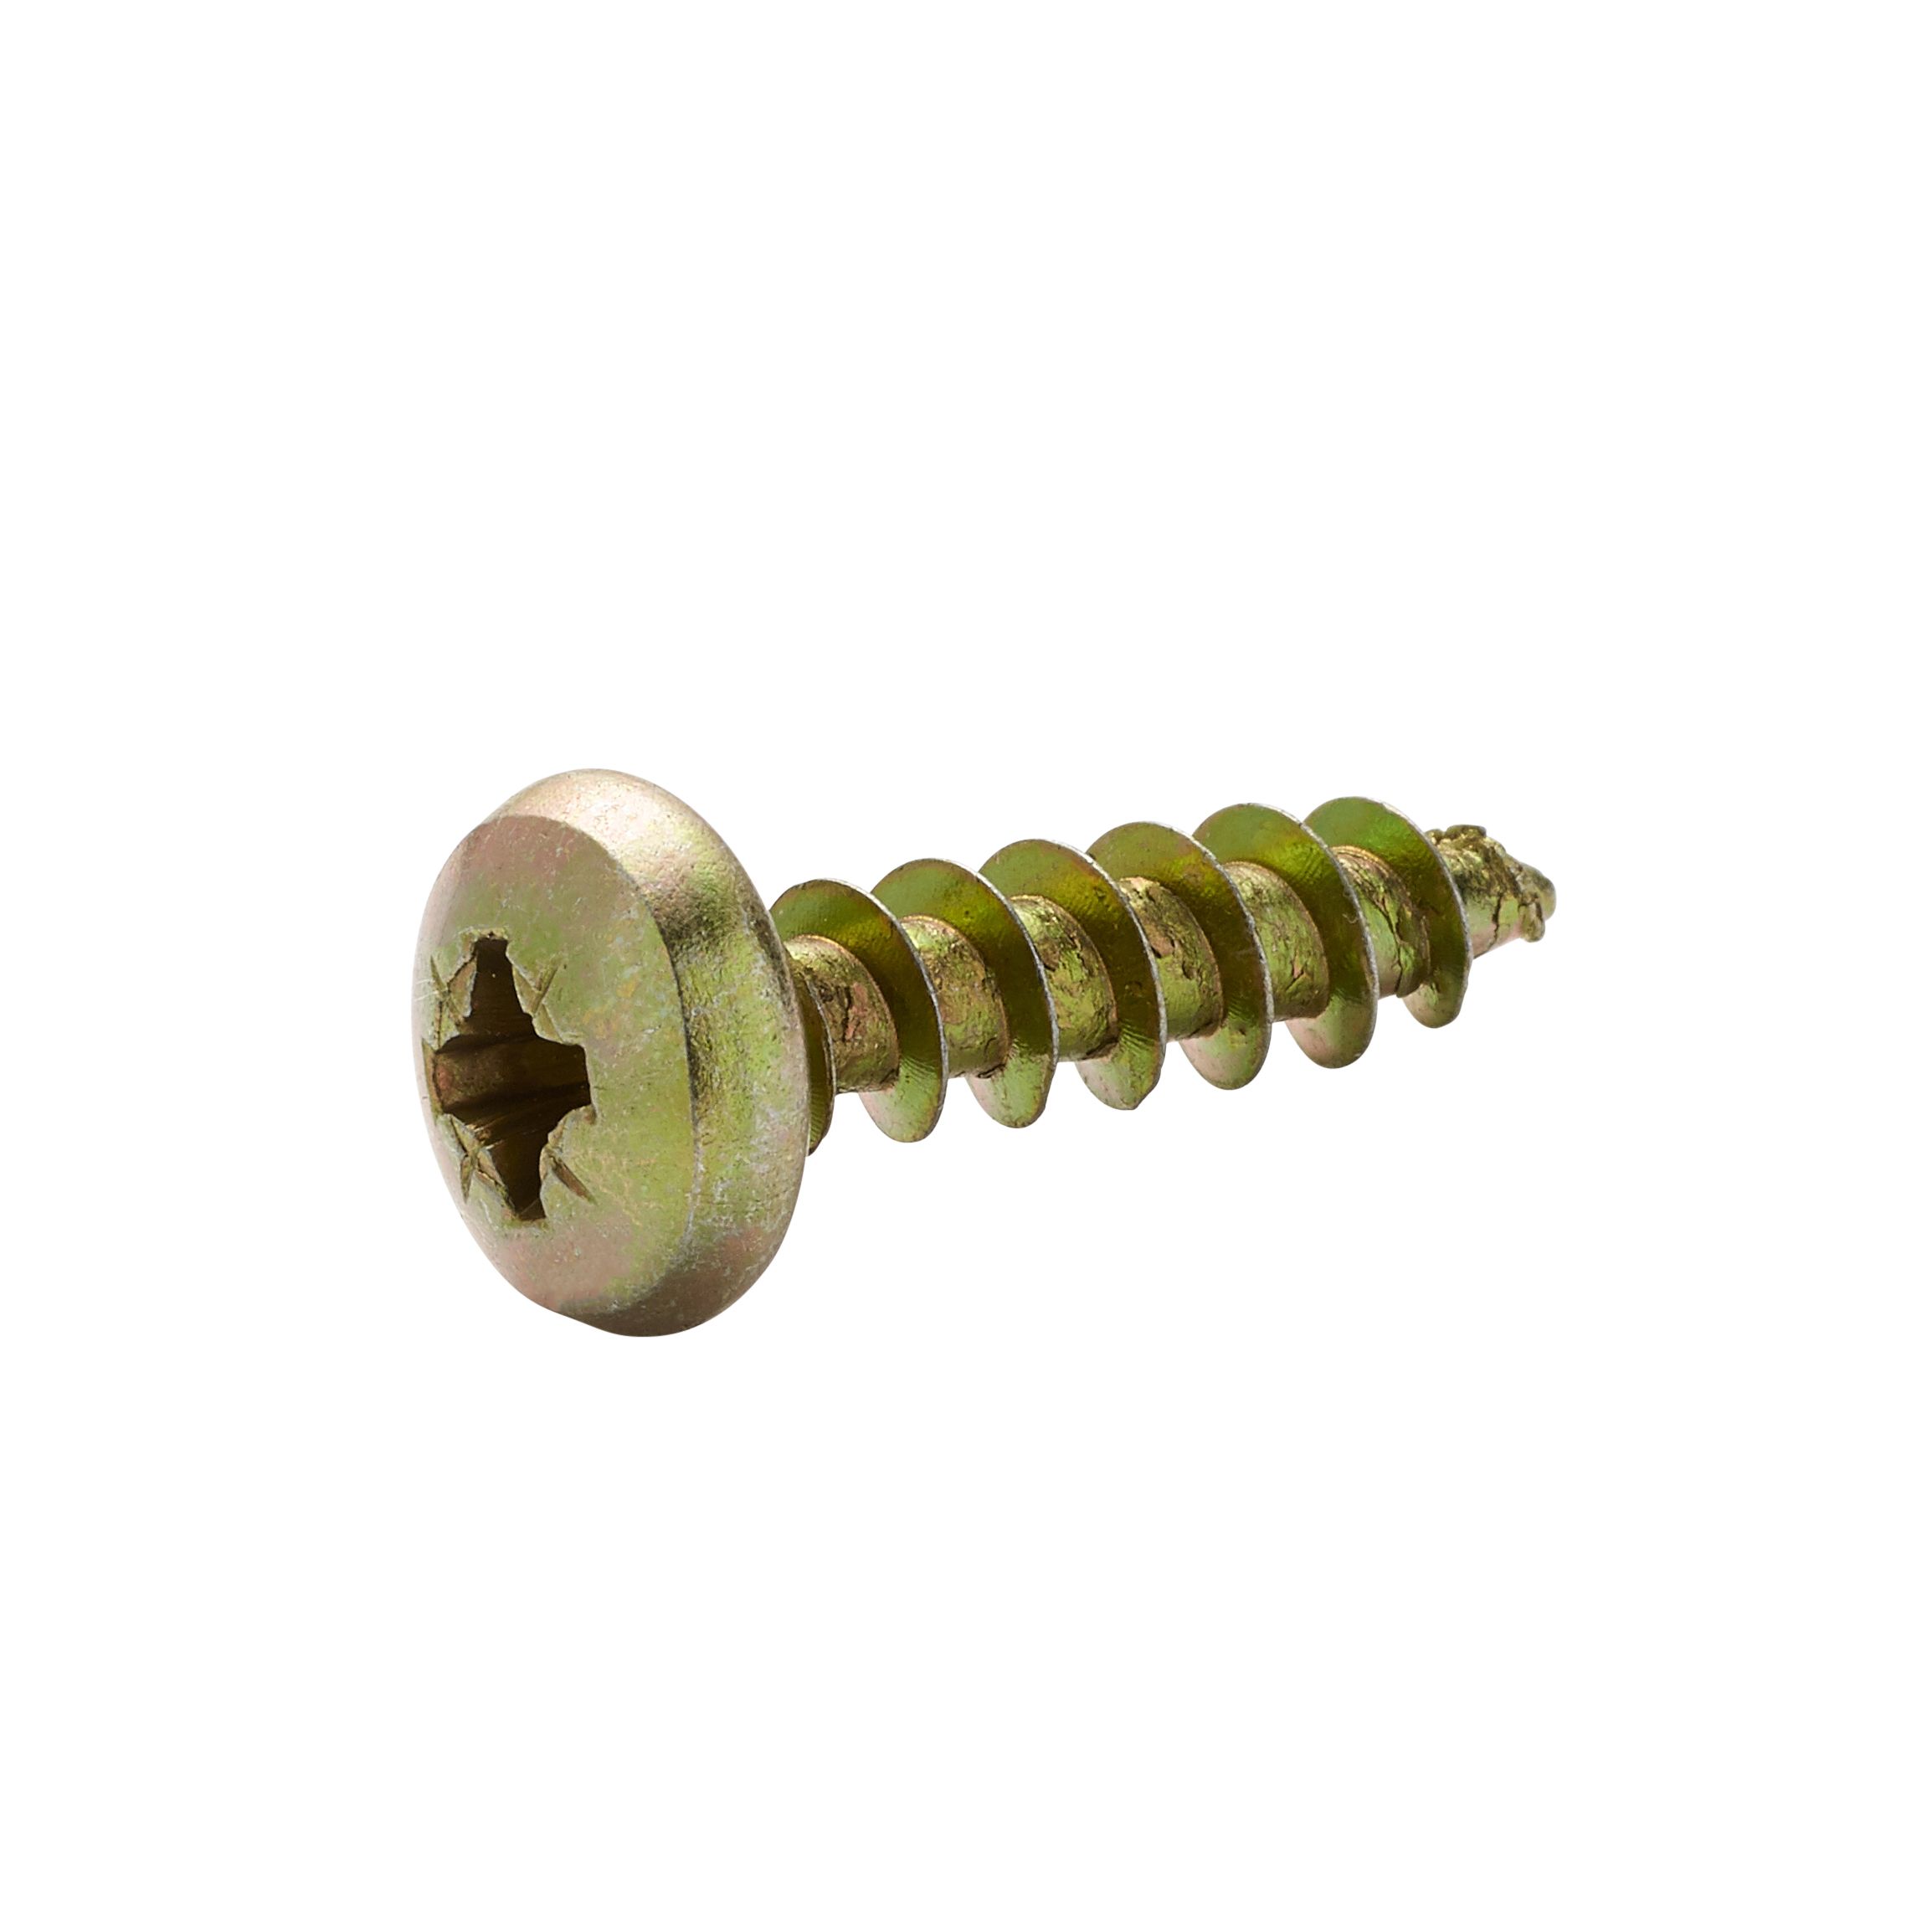 Diall PZ Pan head Yellow-passivated Steel Wood screw (Dia)5mm (L)20mm, Pack of 100